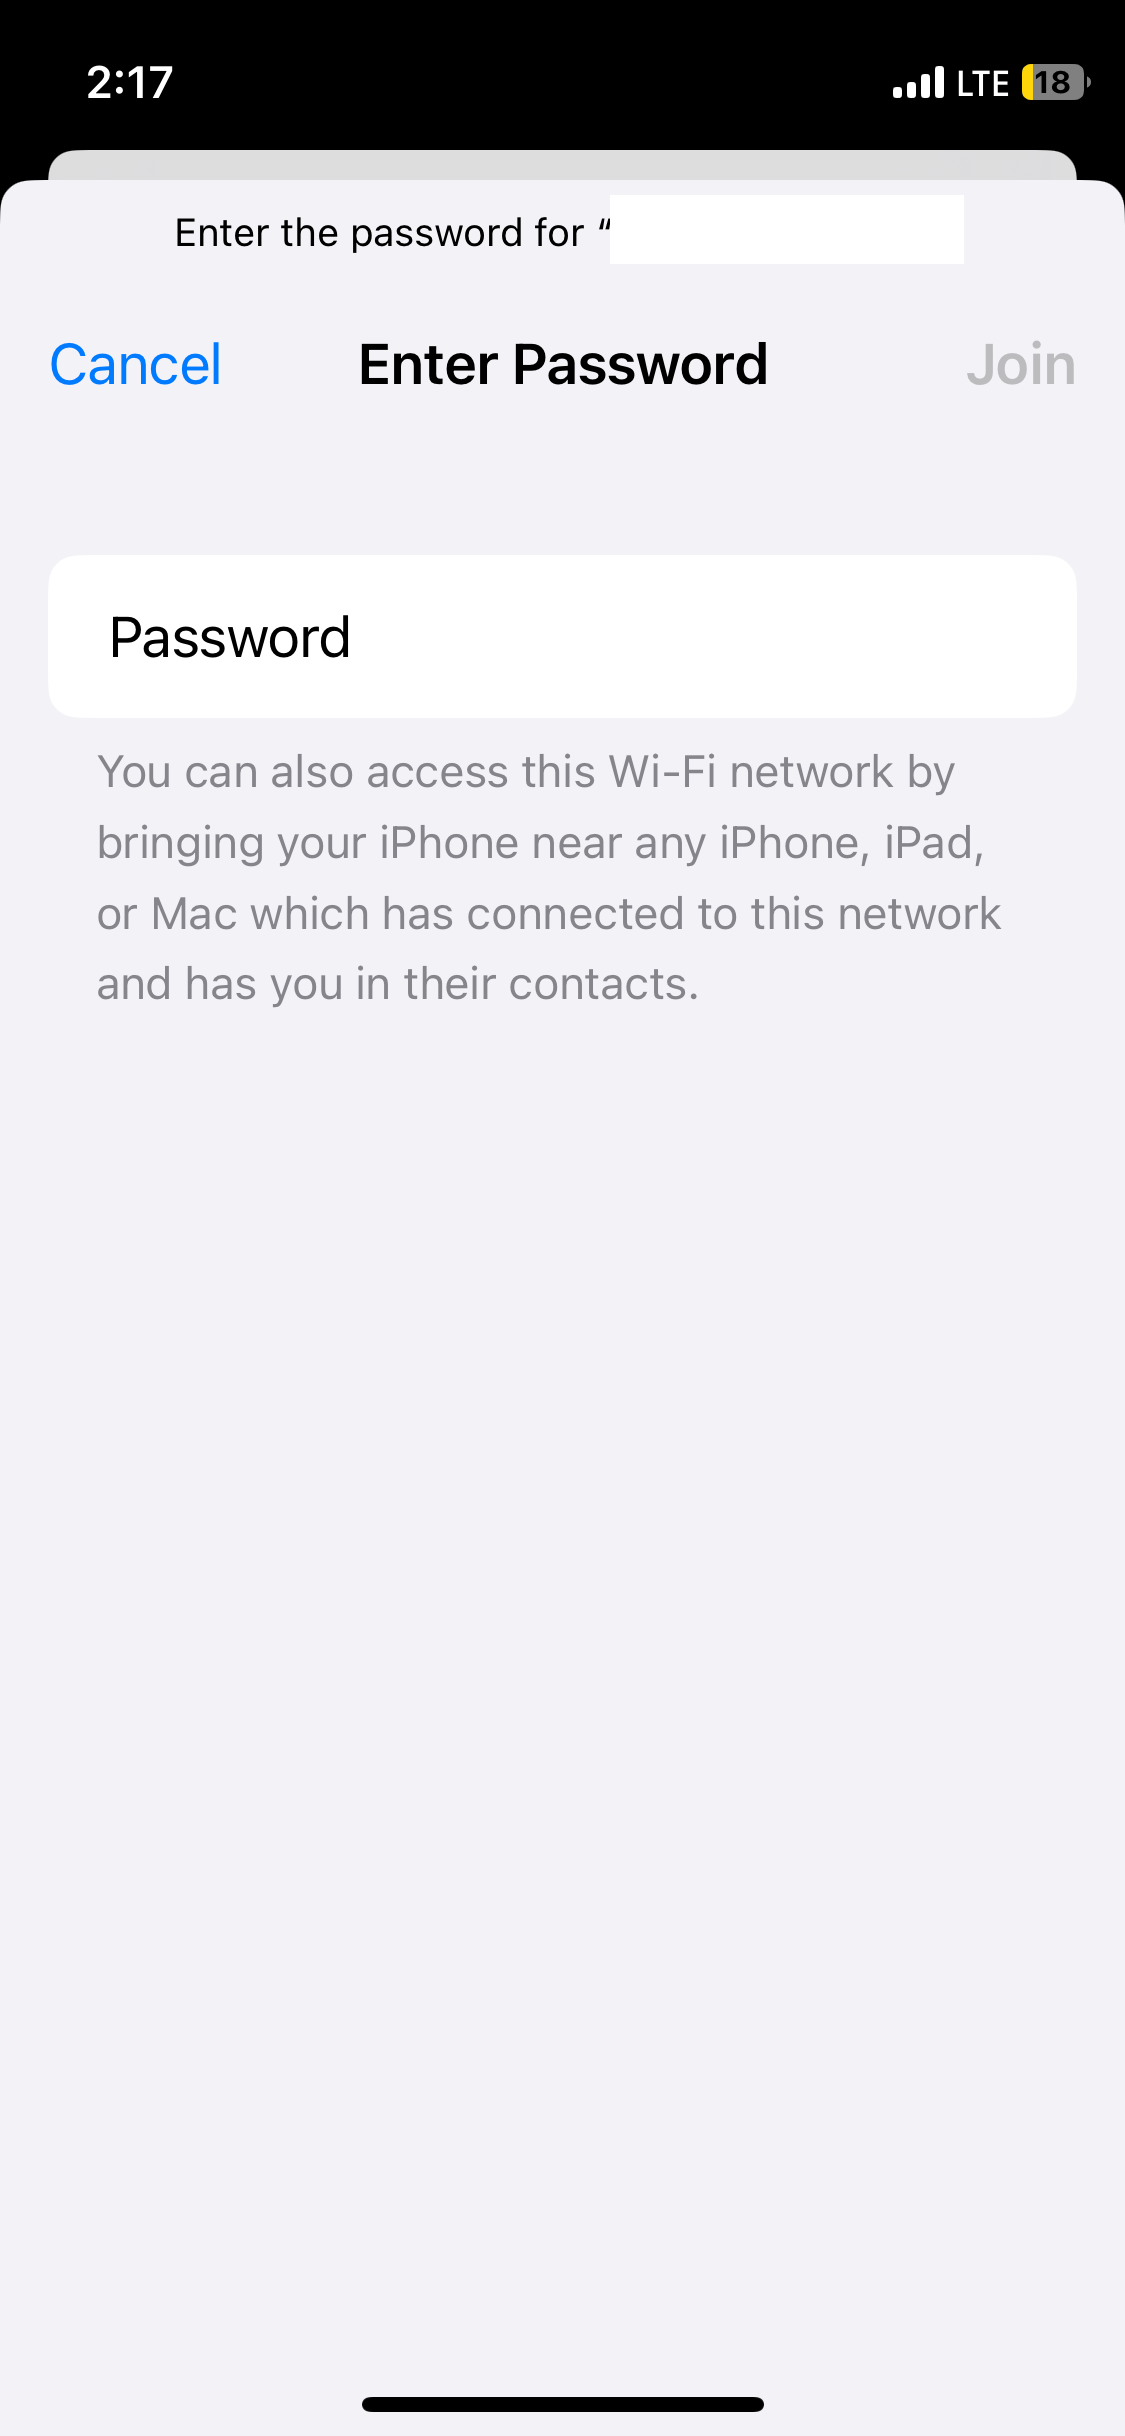 You can also access this Wi-Fi network by bringing your iPhone near any iPhone iPad or Mac which has connected to this network and has you in their contacts